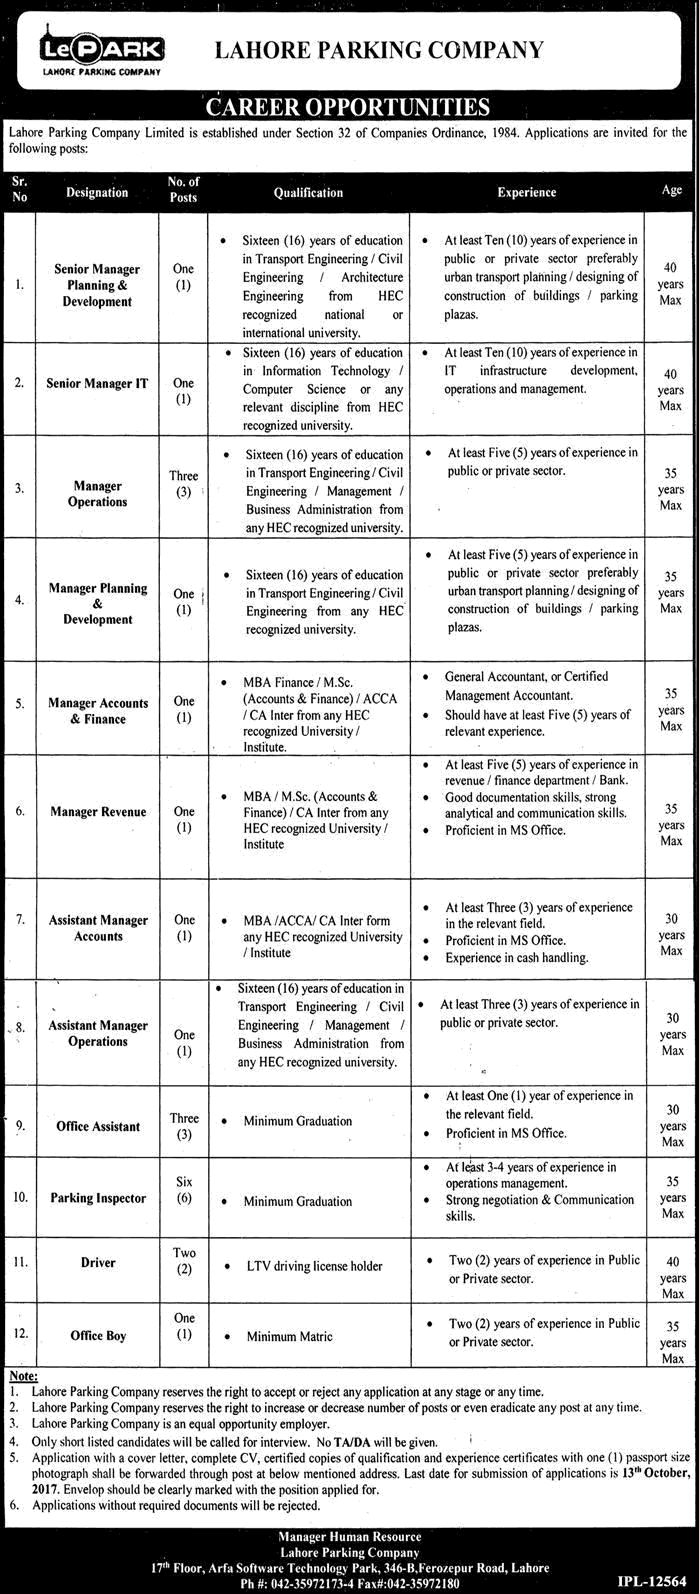 Lahore Parking Company Jobs September 2017 Parking Inspectors, Office Assistants & Others Latest